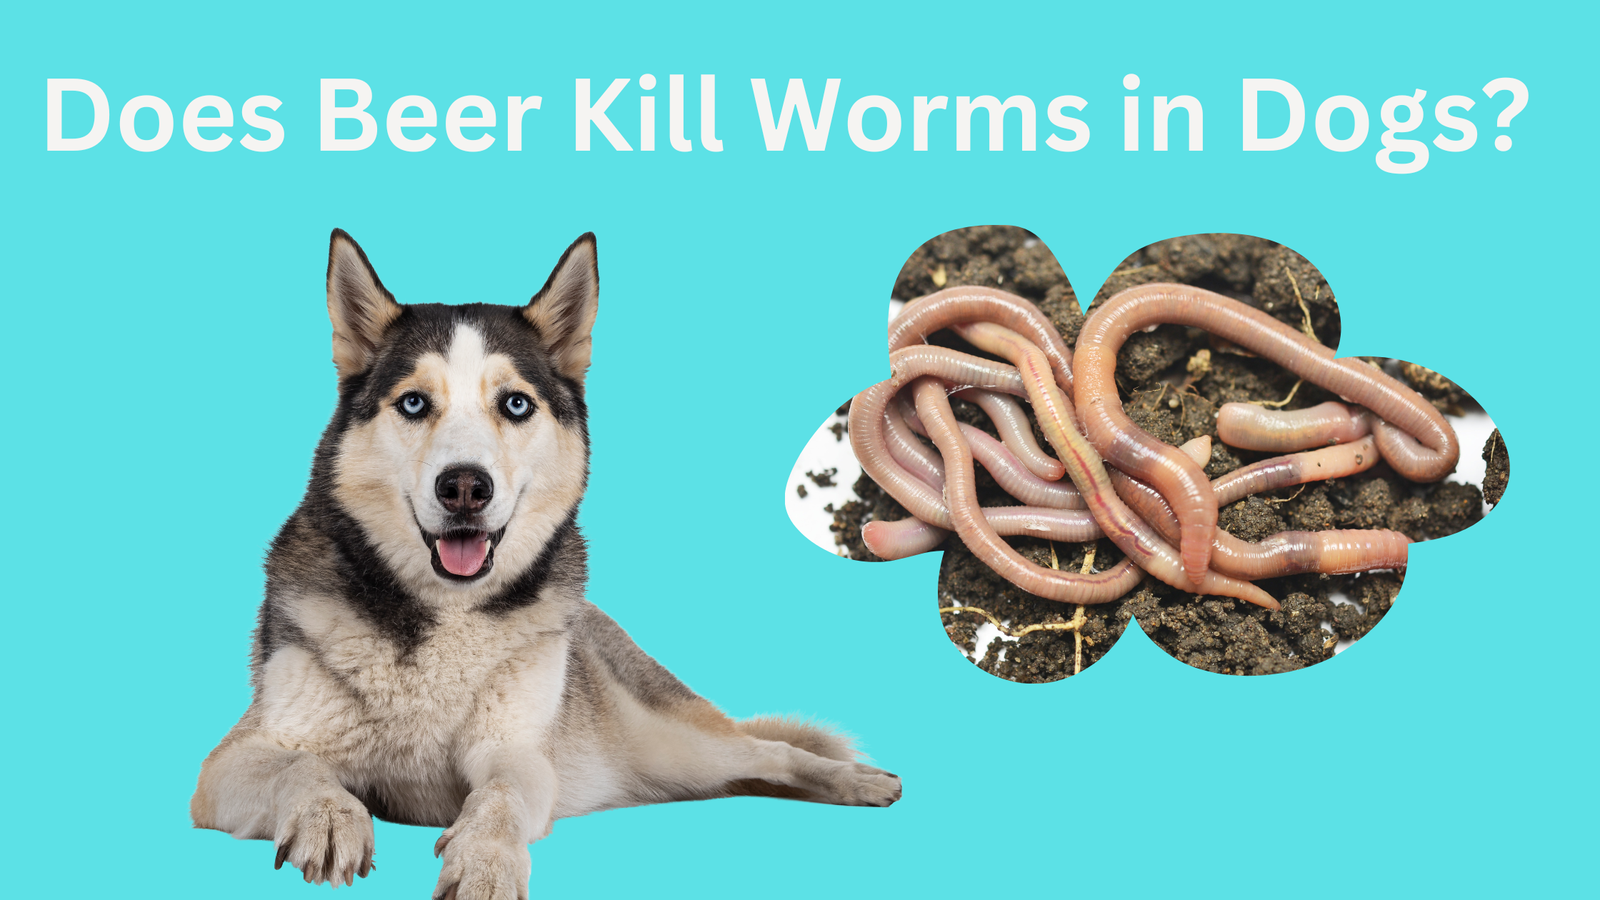 Does Beer Kill Worms in Dogs